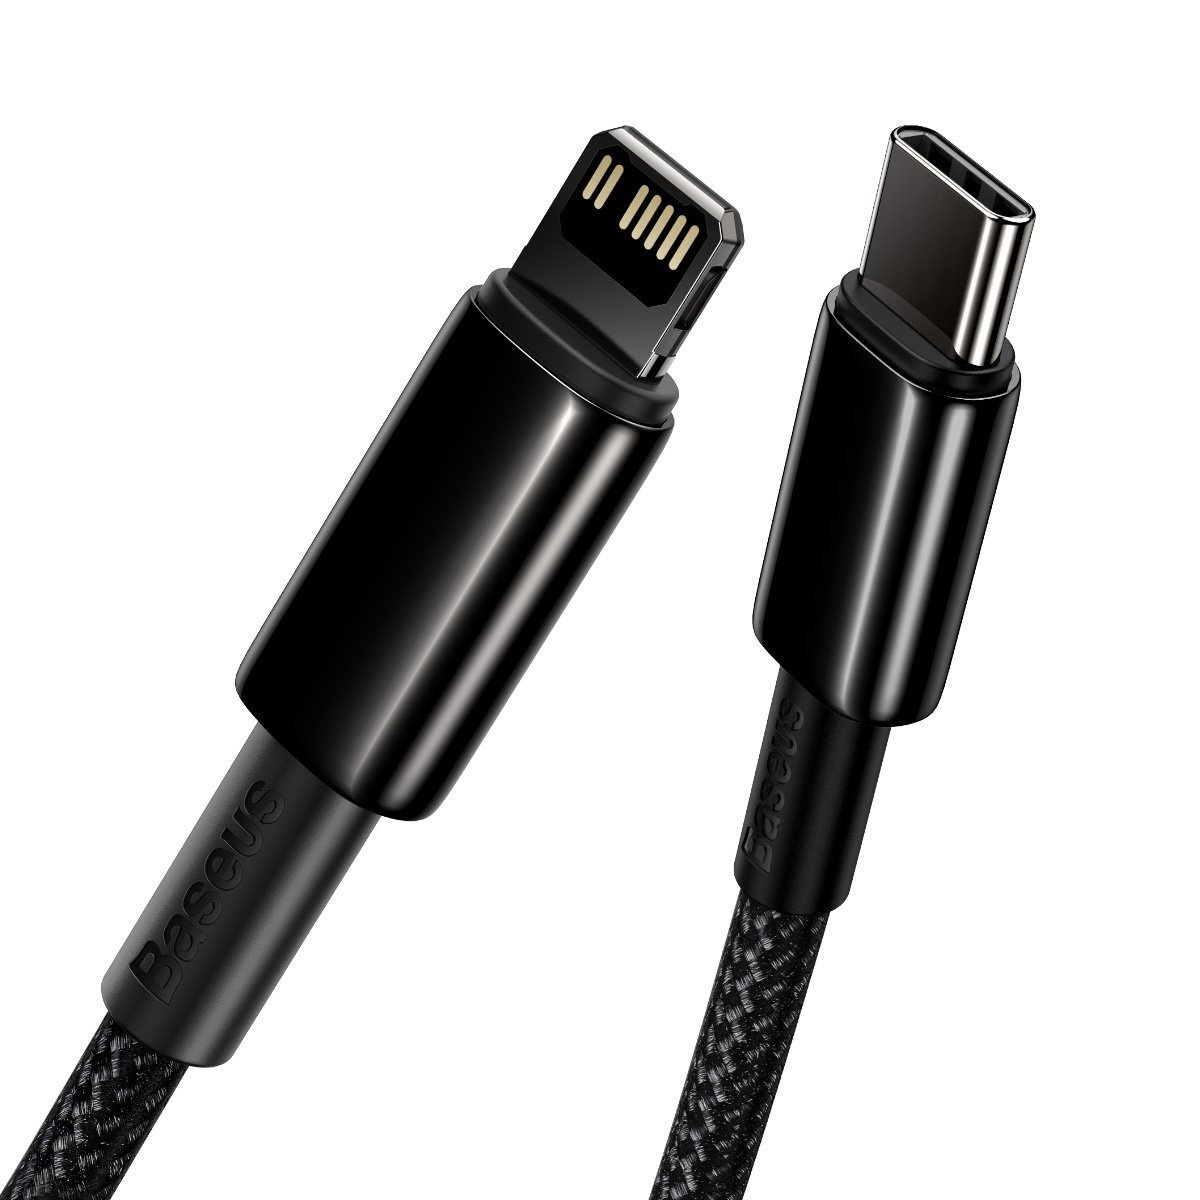 Baseus Tungsten Gold Cable Type-C to Lightning PD 20W 2m (black)